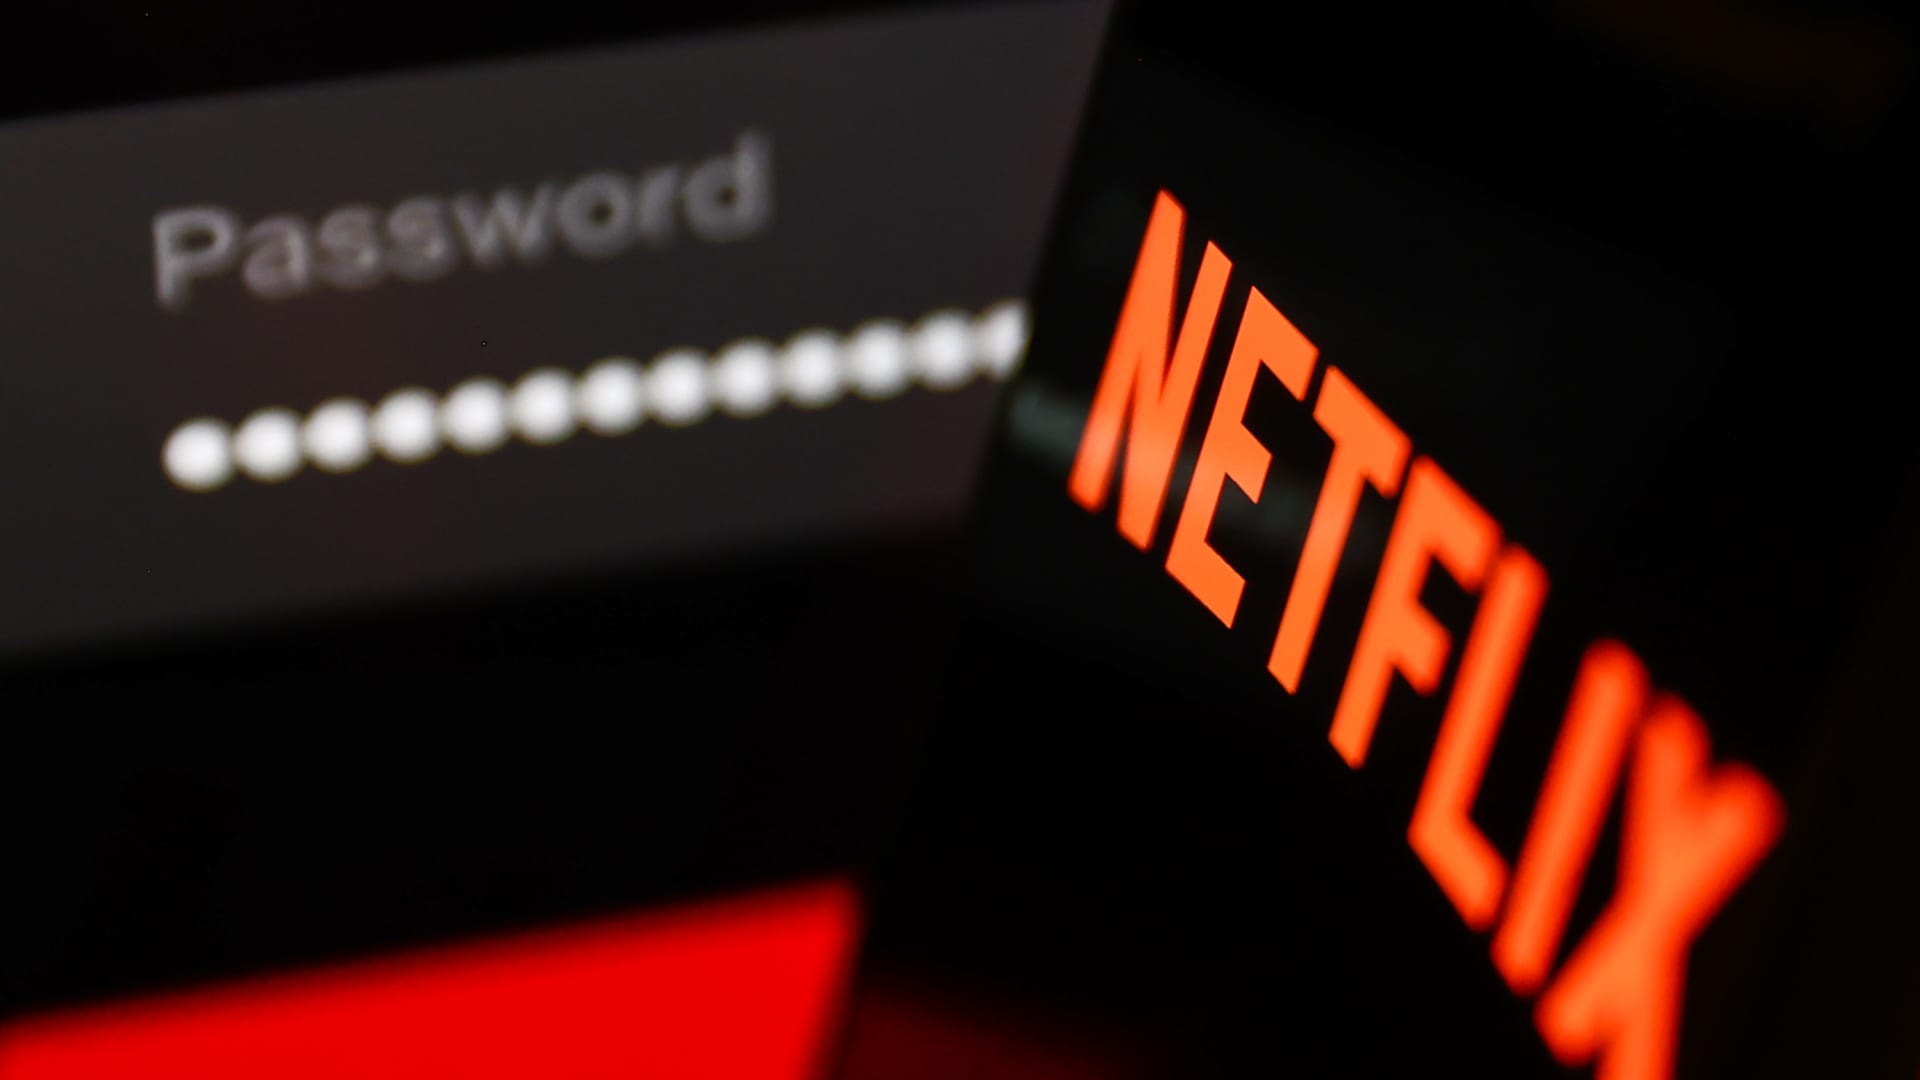 Netflix sign in page displayed on a laptop sscreen and Netflix logo displayed on a phone screen are seen in this illustration photo taken in Krakow, Poland on January 2, 2023.